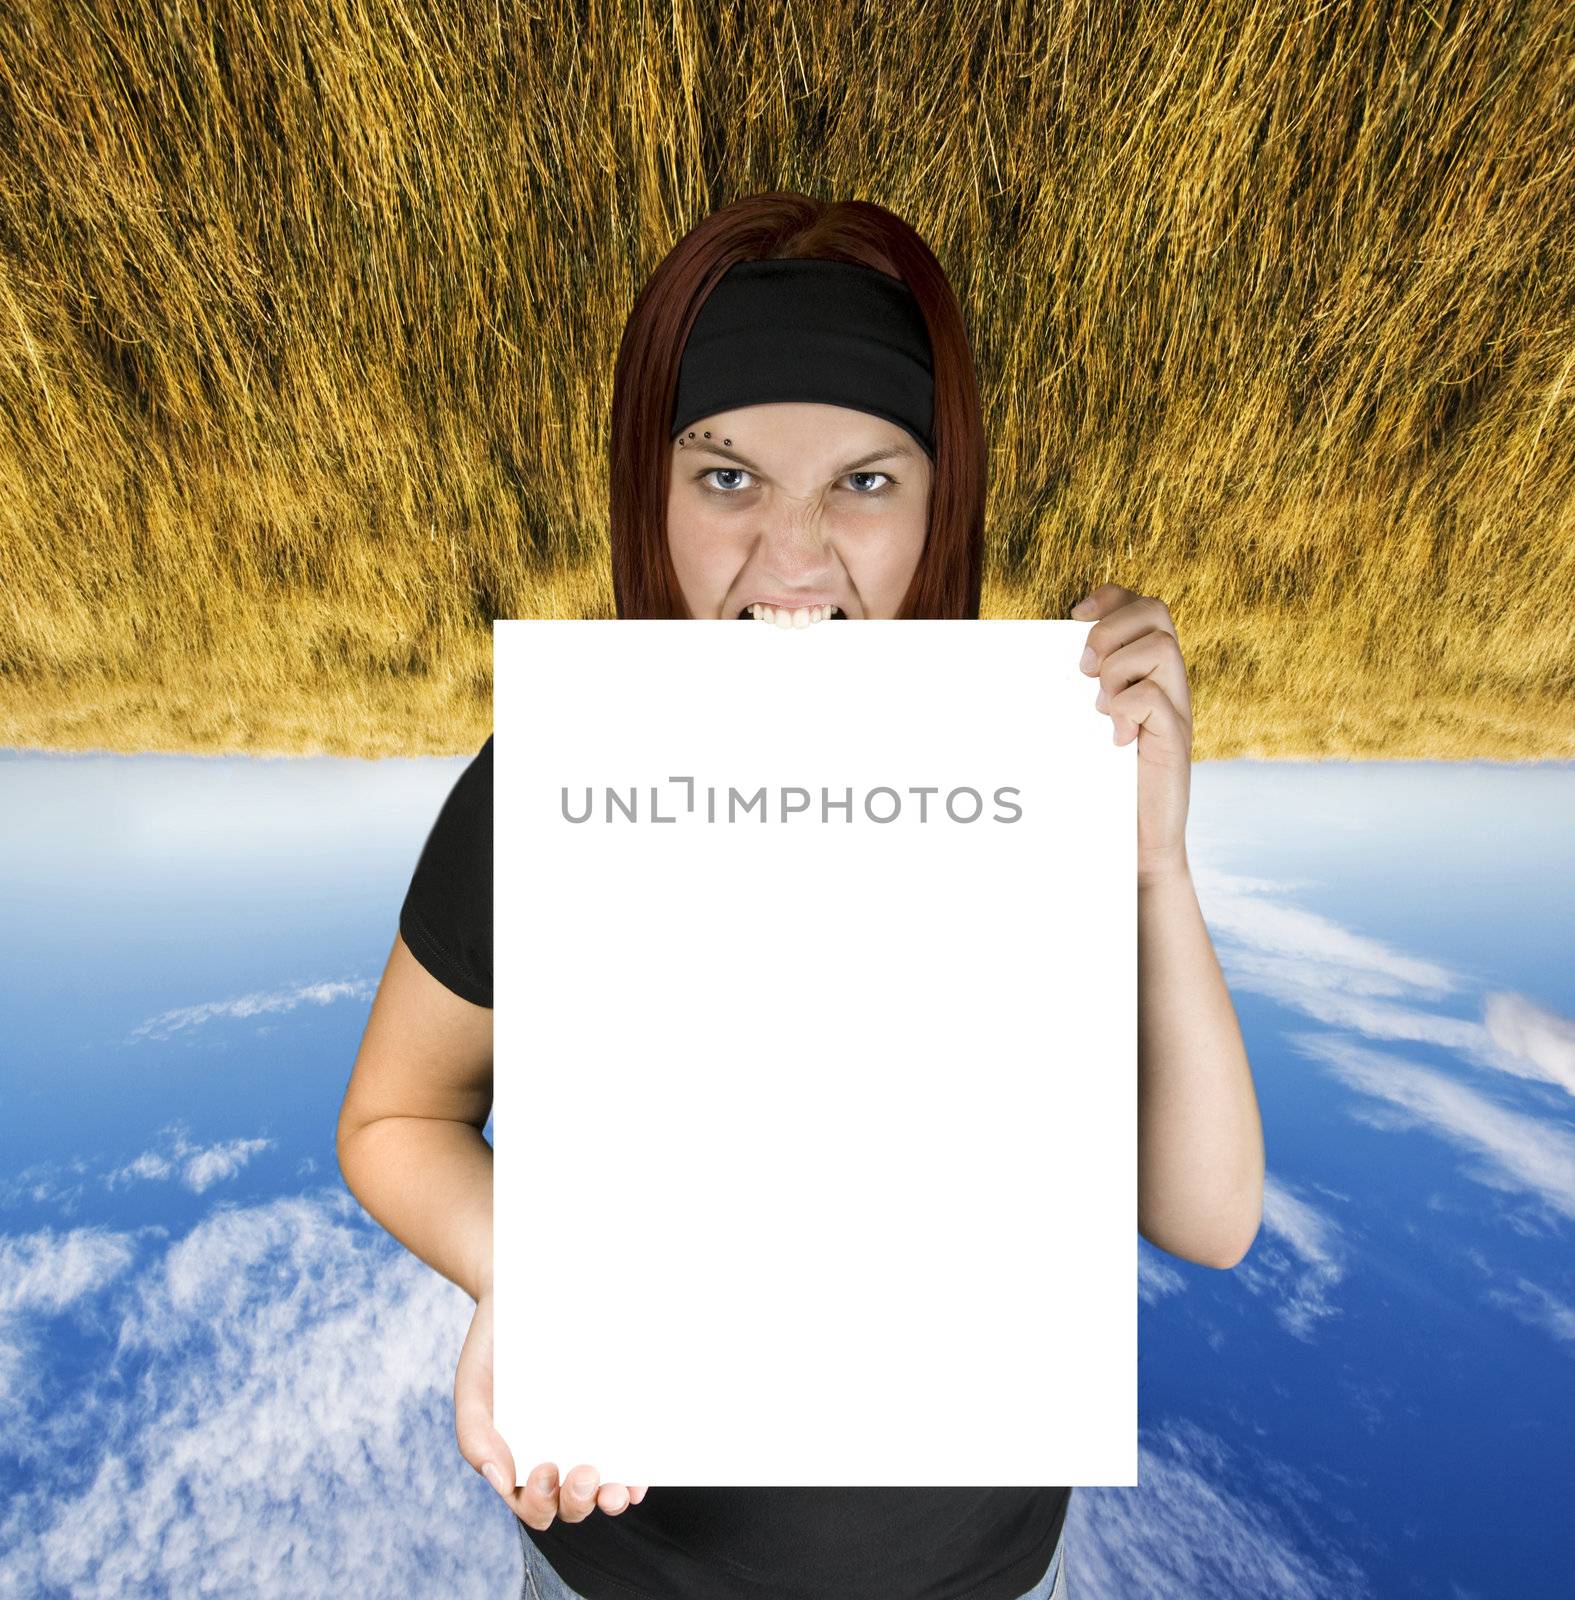 Redhead girl holding a white canvas perfect for design incorporation.

Shot in studio. Composite background.